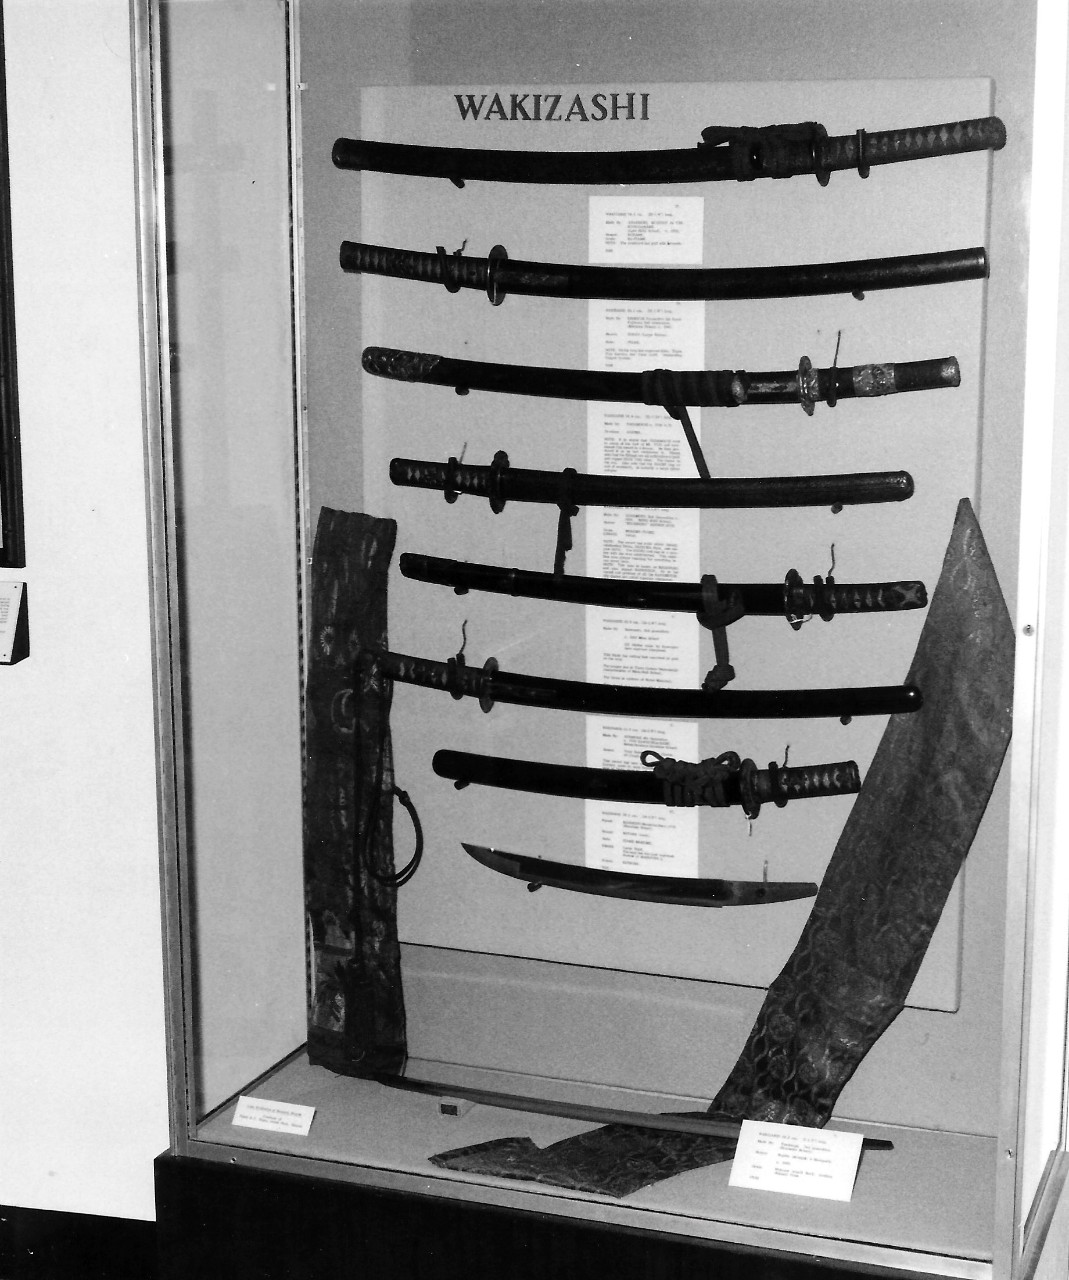 Samurai Swords Exhibit.   The Navy Memorial Museum (now National Museum of the Navy).  Shown:  Wakizashi exhibit case.   Exhibit was held from November 1977 to January 1978 and displayed thirty-seven swords from the collection of David E. J. Pepin.   National Museum of the U.S. Navy Photograph, NMUSN-Photo-13